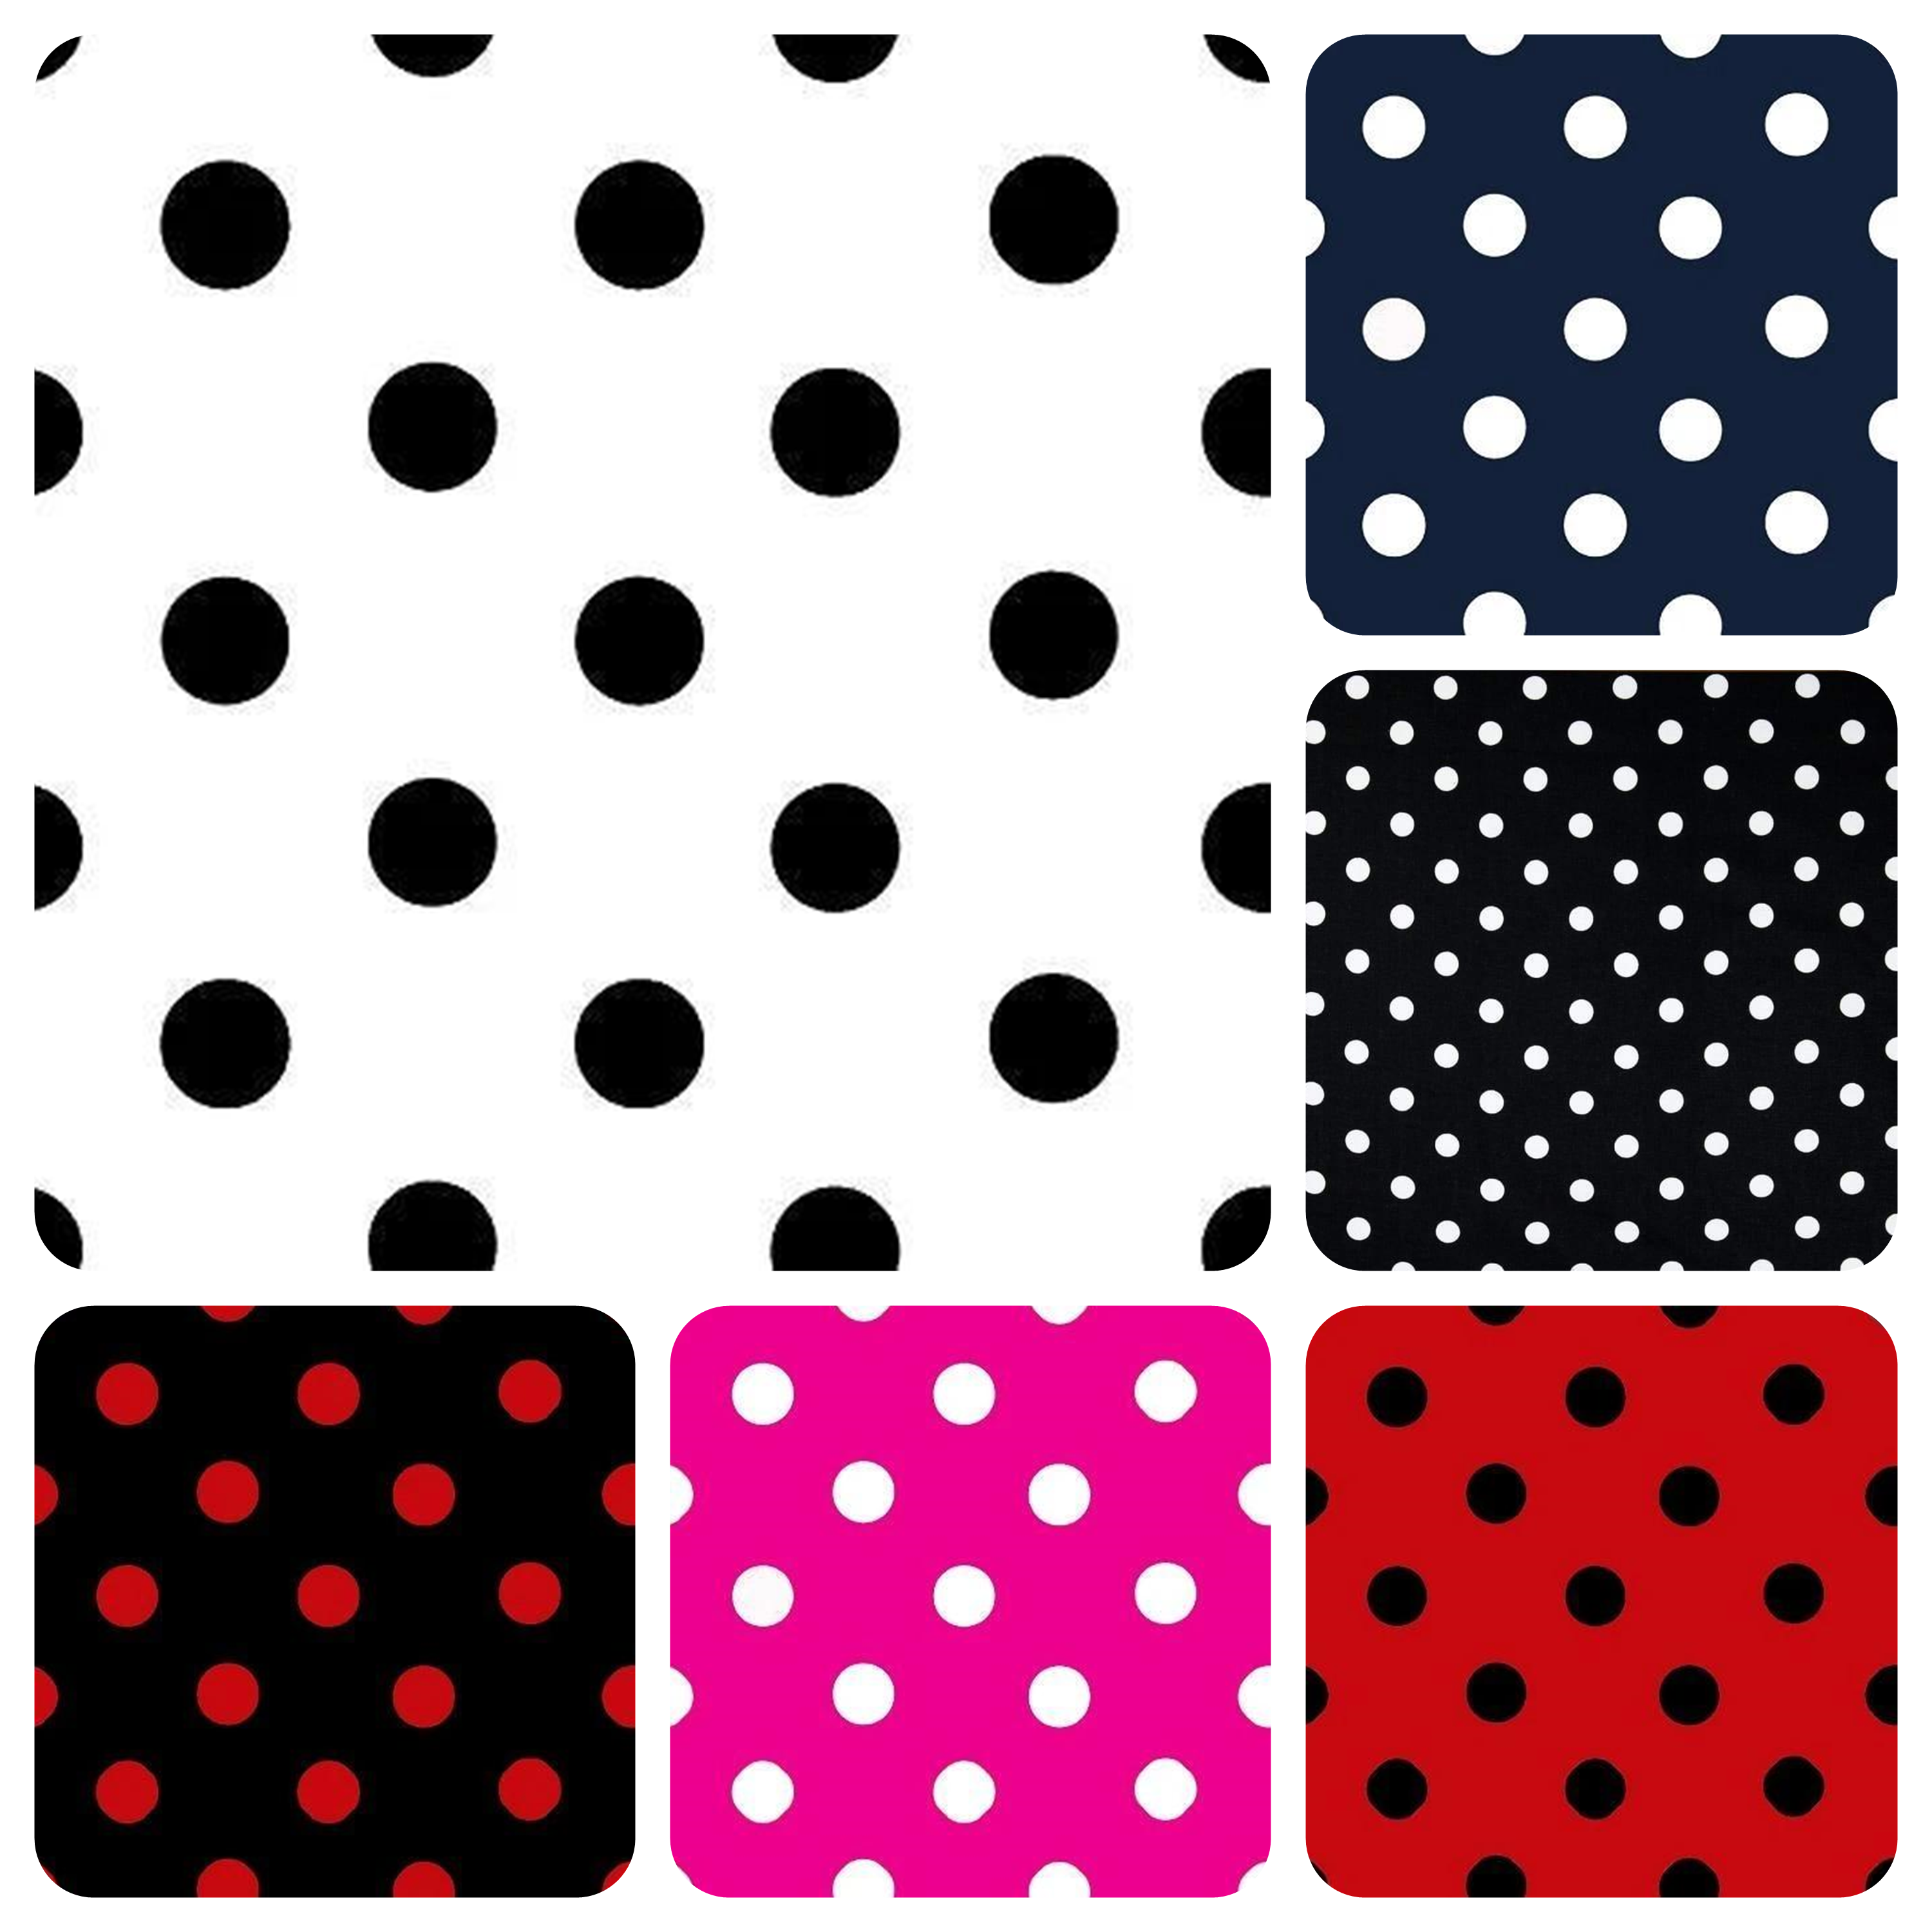 1-Inch Polka Dot/Spot Poly Cotton Fabric By The YardCotton FabricICEFABRICICE FABRICSWhite Dot on Black11-Inch Polka Dot/Spot Poly Cotton Fabric By The Yard ICEFABRIC